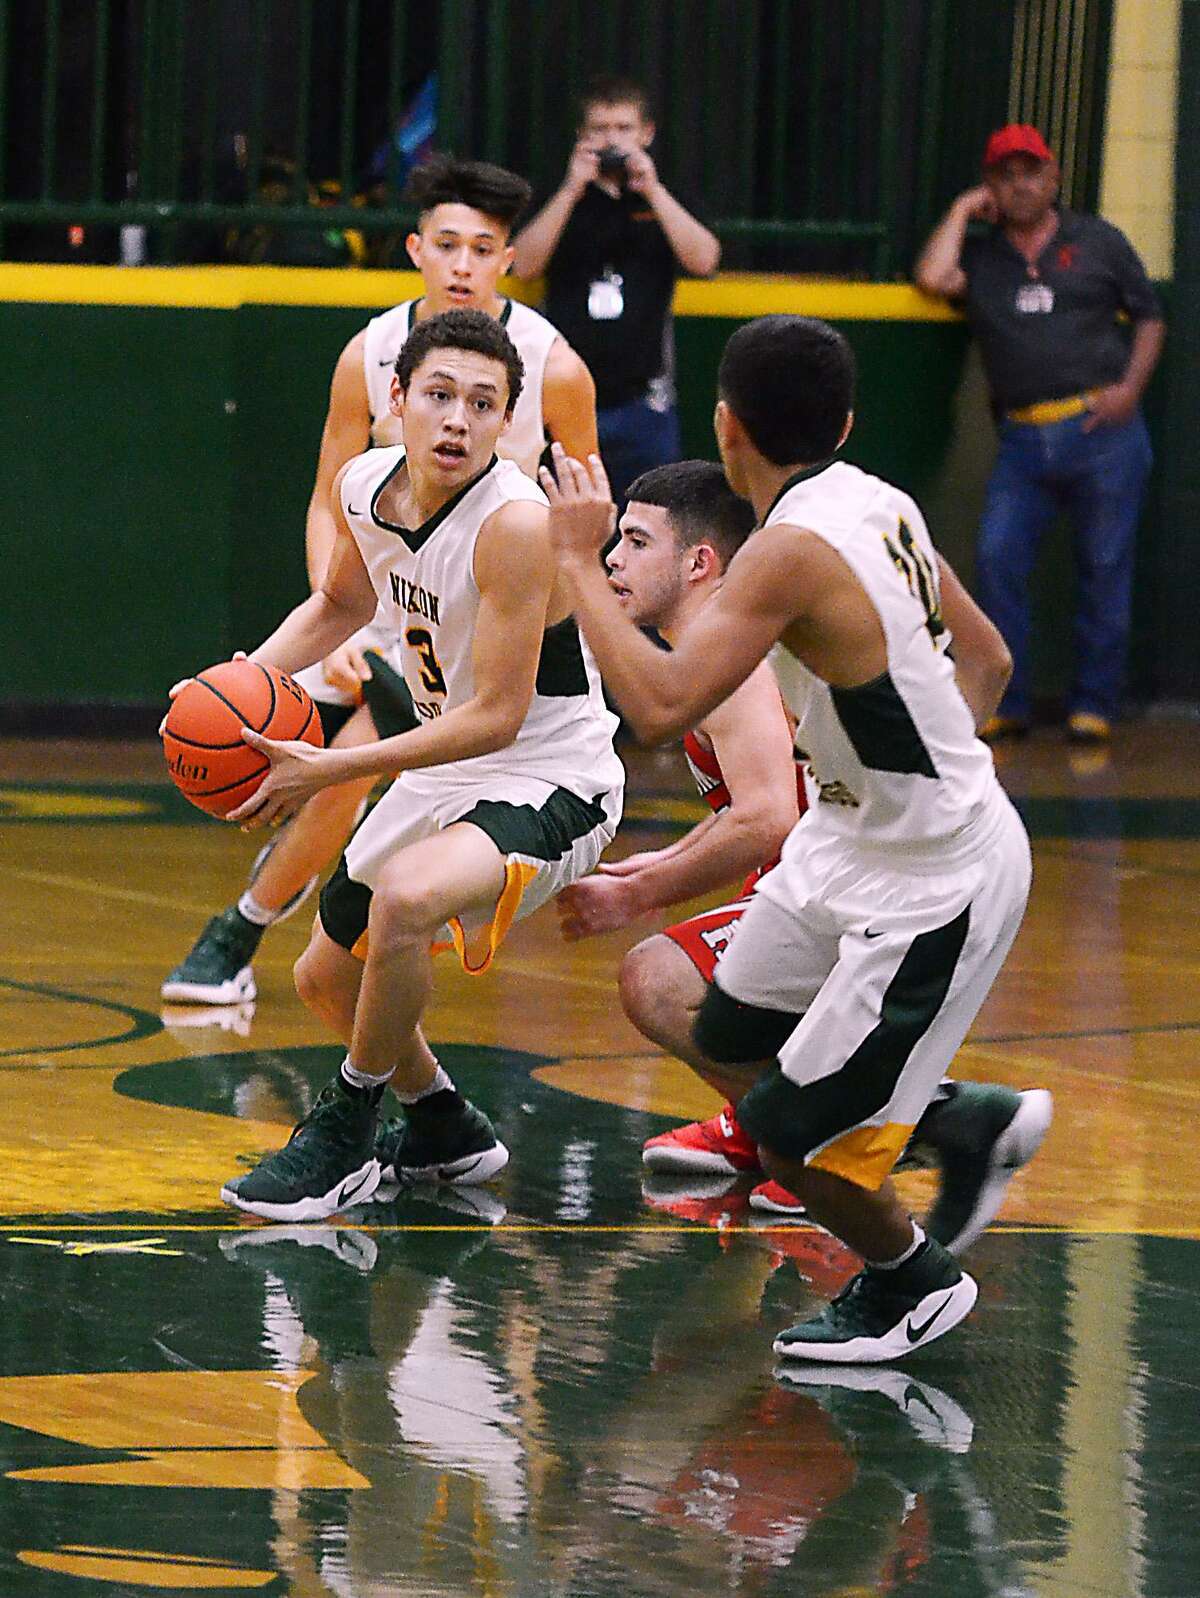 Nixon’s AJ Melendez handles the ball in a crowd as the Mustangs topped Roma 79-67 on Friday night, clinching the No. 2 seed in District 31-5A.